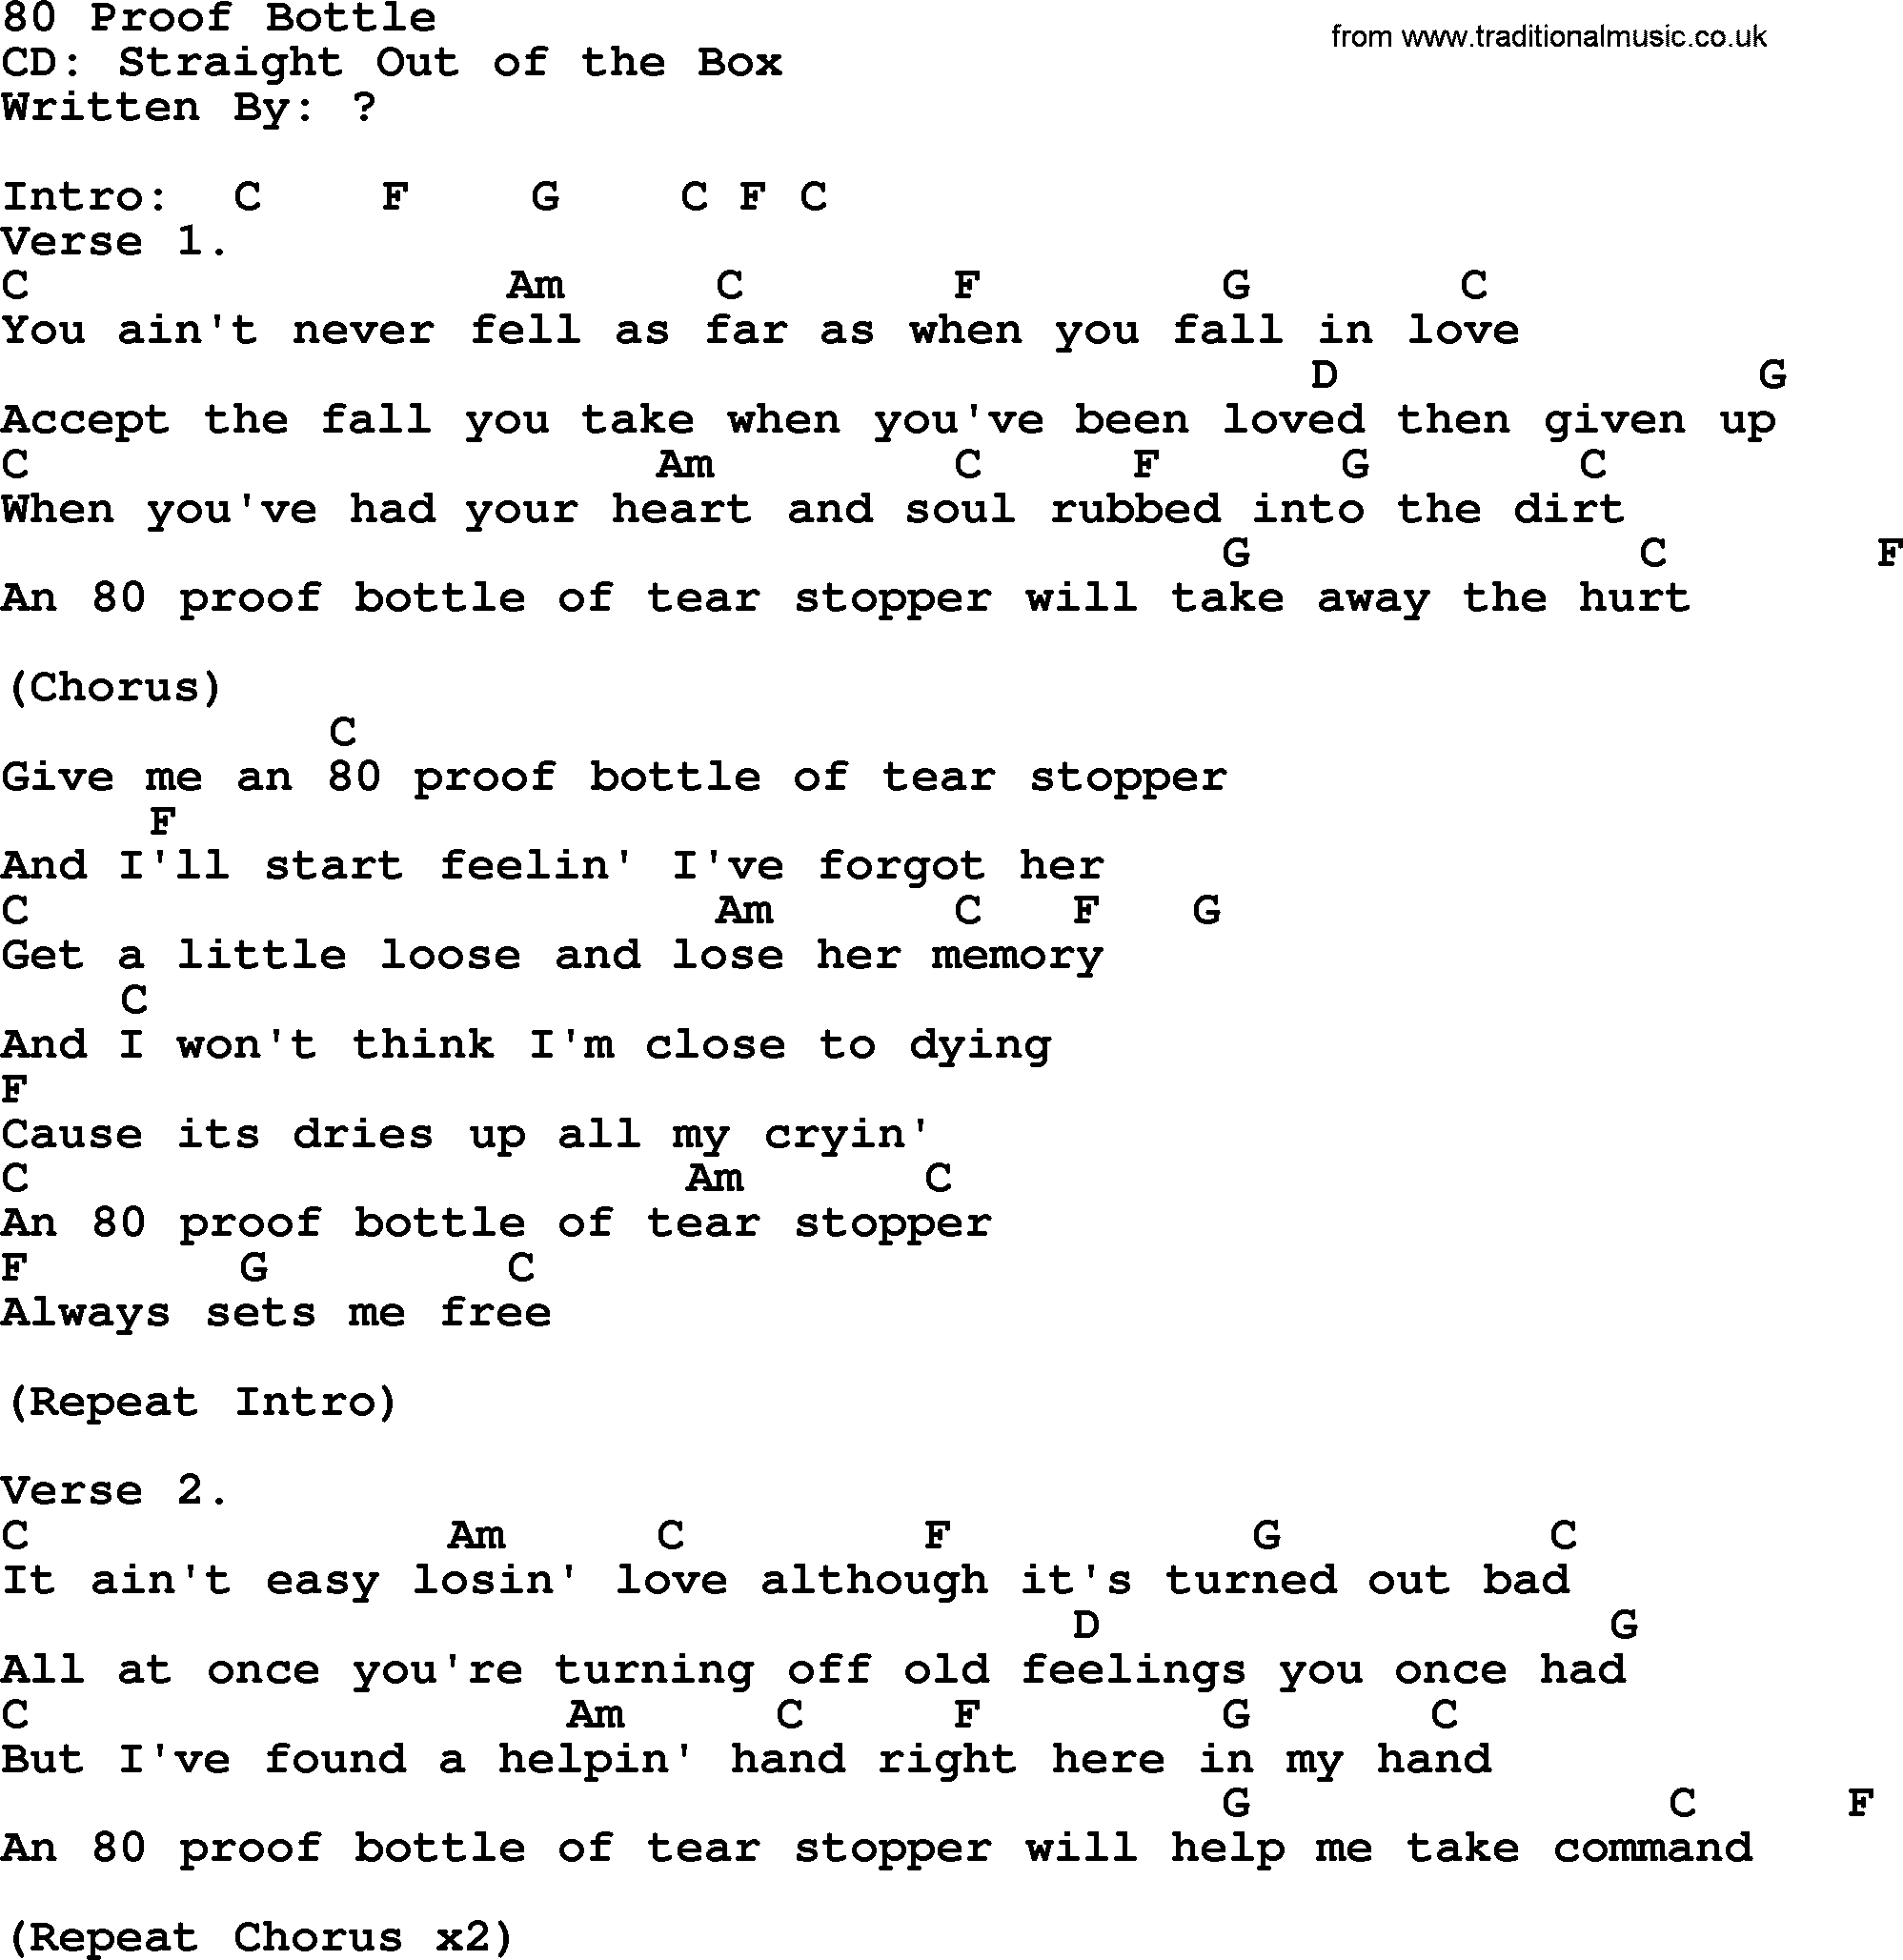 George Strait song: 80 Proof Bottle, lyrics and chords